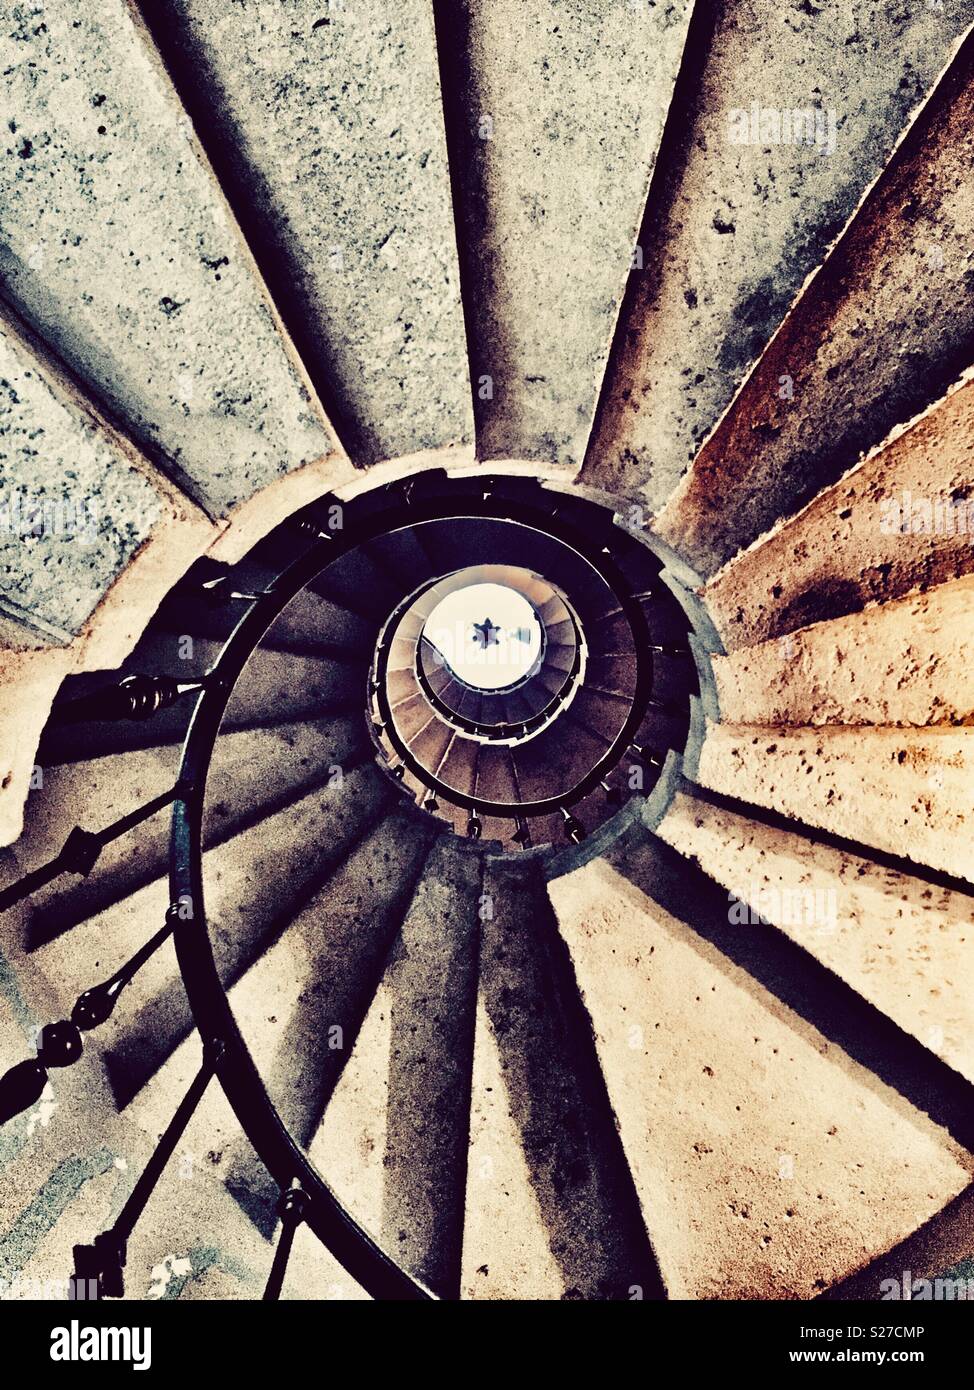 Winding staircase viewed from below at the Vizcaya Museum in Coconut Grove, Miami, Florida Stock Photo